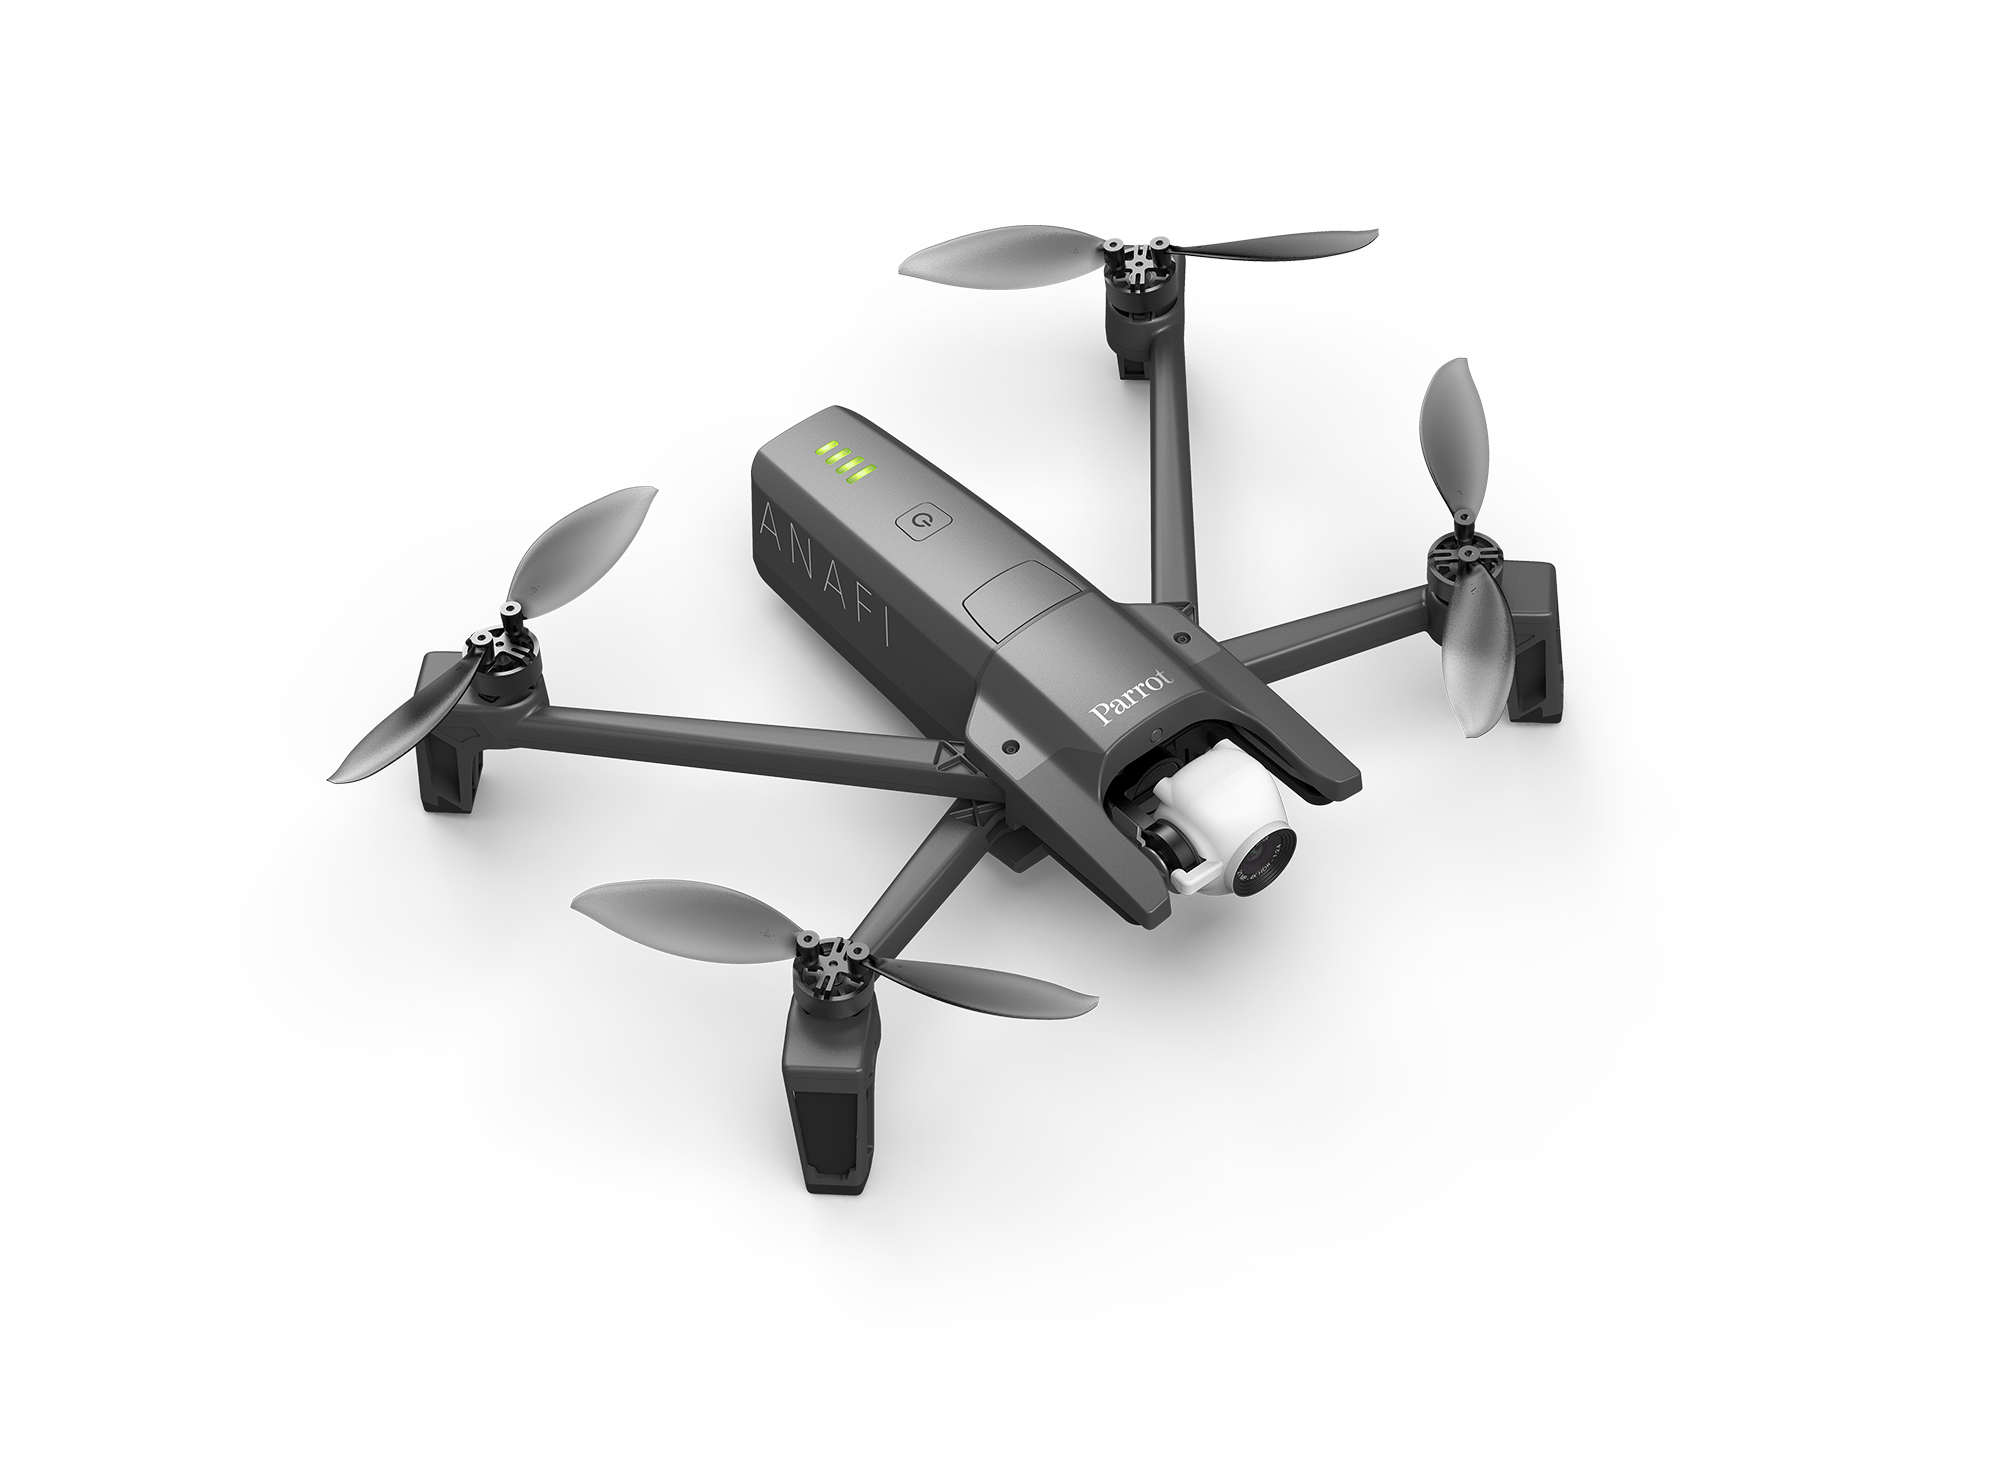 ANAFI Work Ultra-Compact Drone From Parrot